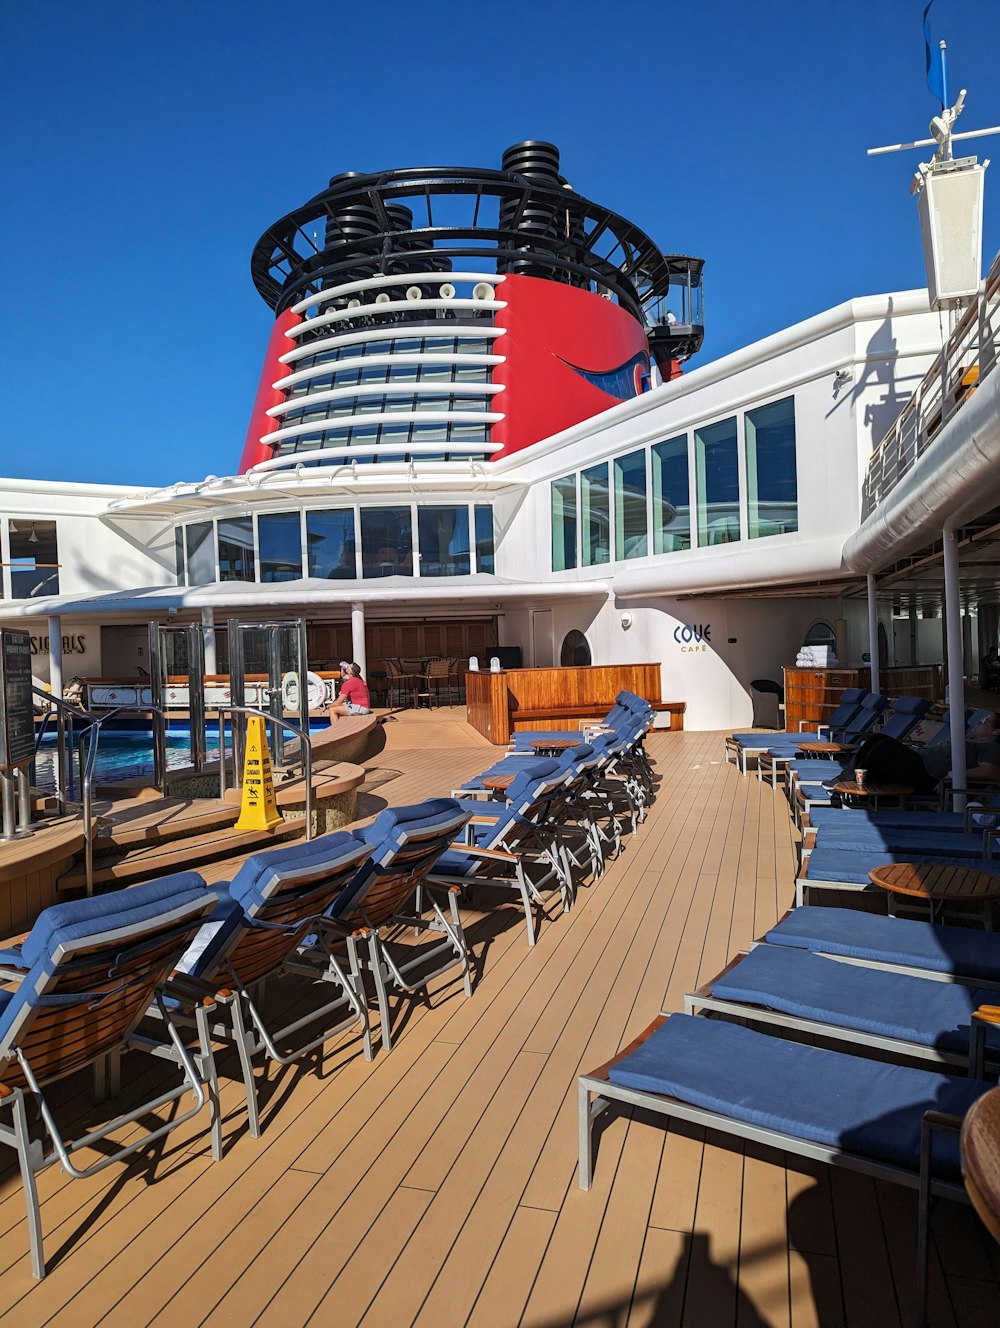 a cruise ship deck with lounge chairs and a large cruise ship in the background